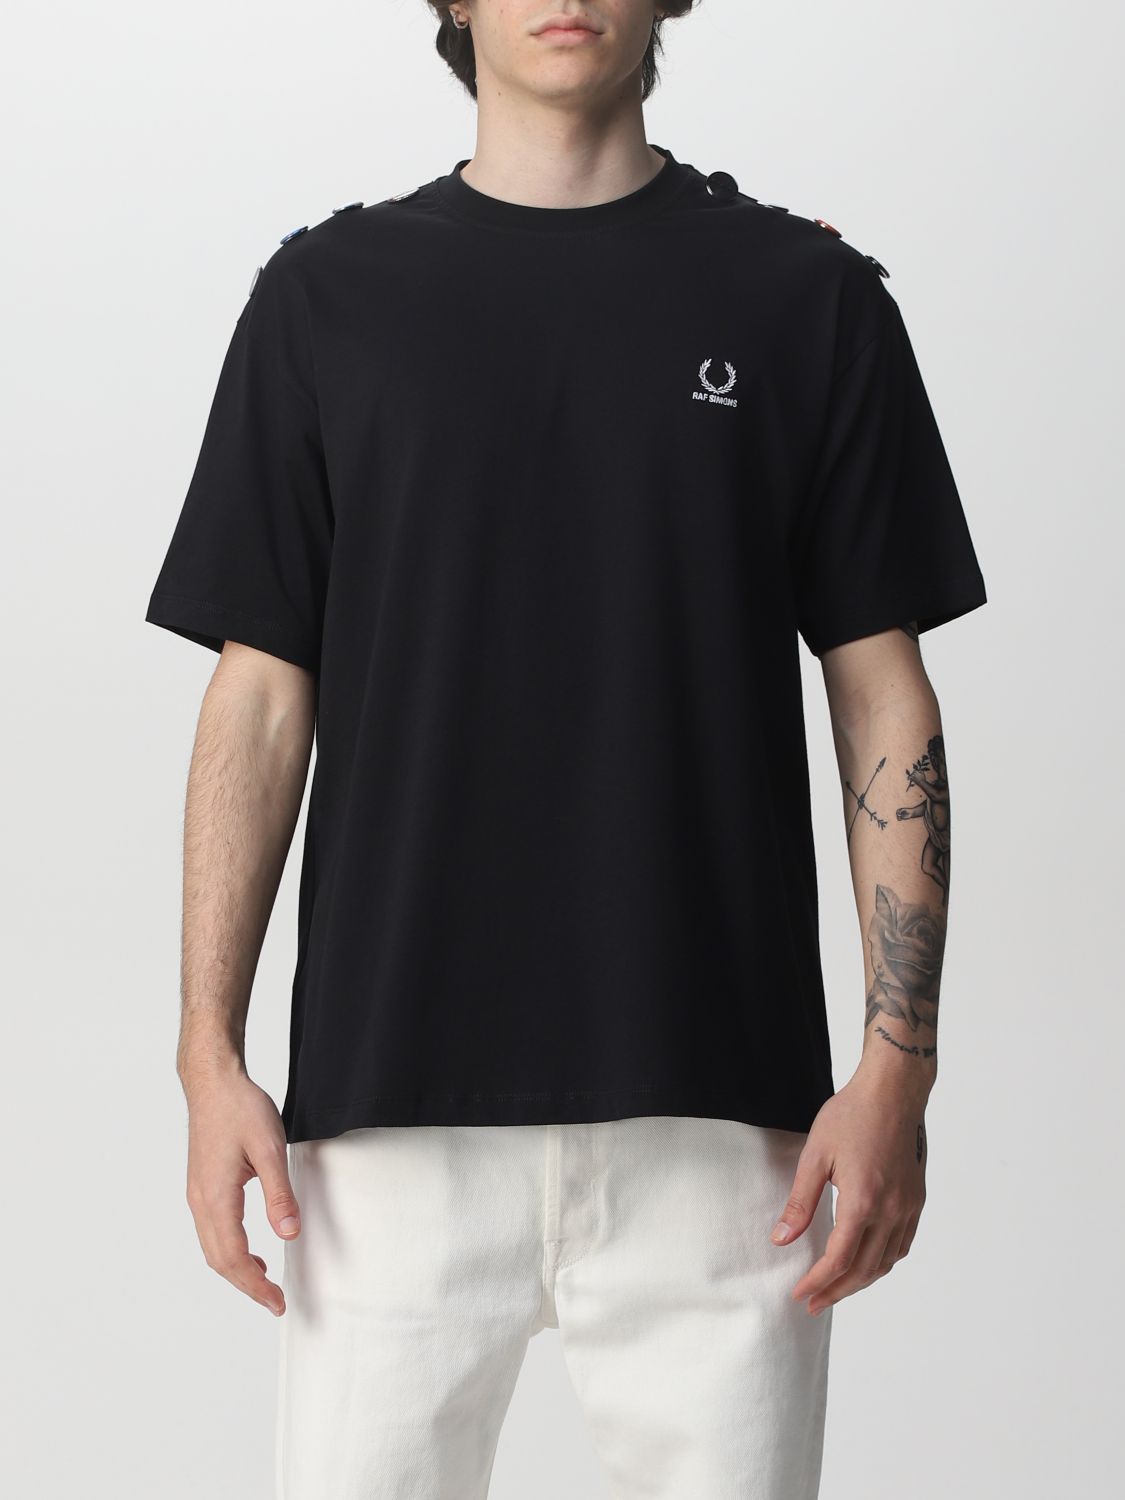 T-shirt Fred Perry By Raf Simons: Fred Perry By Raf Simons t-shirt for man black 1